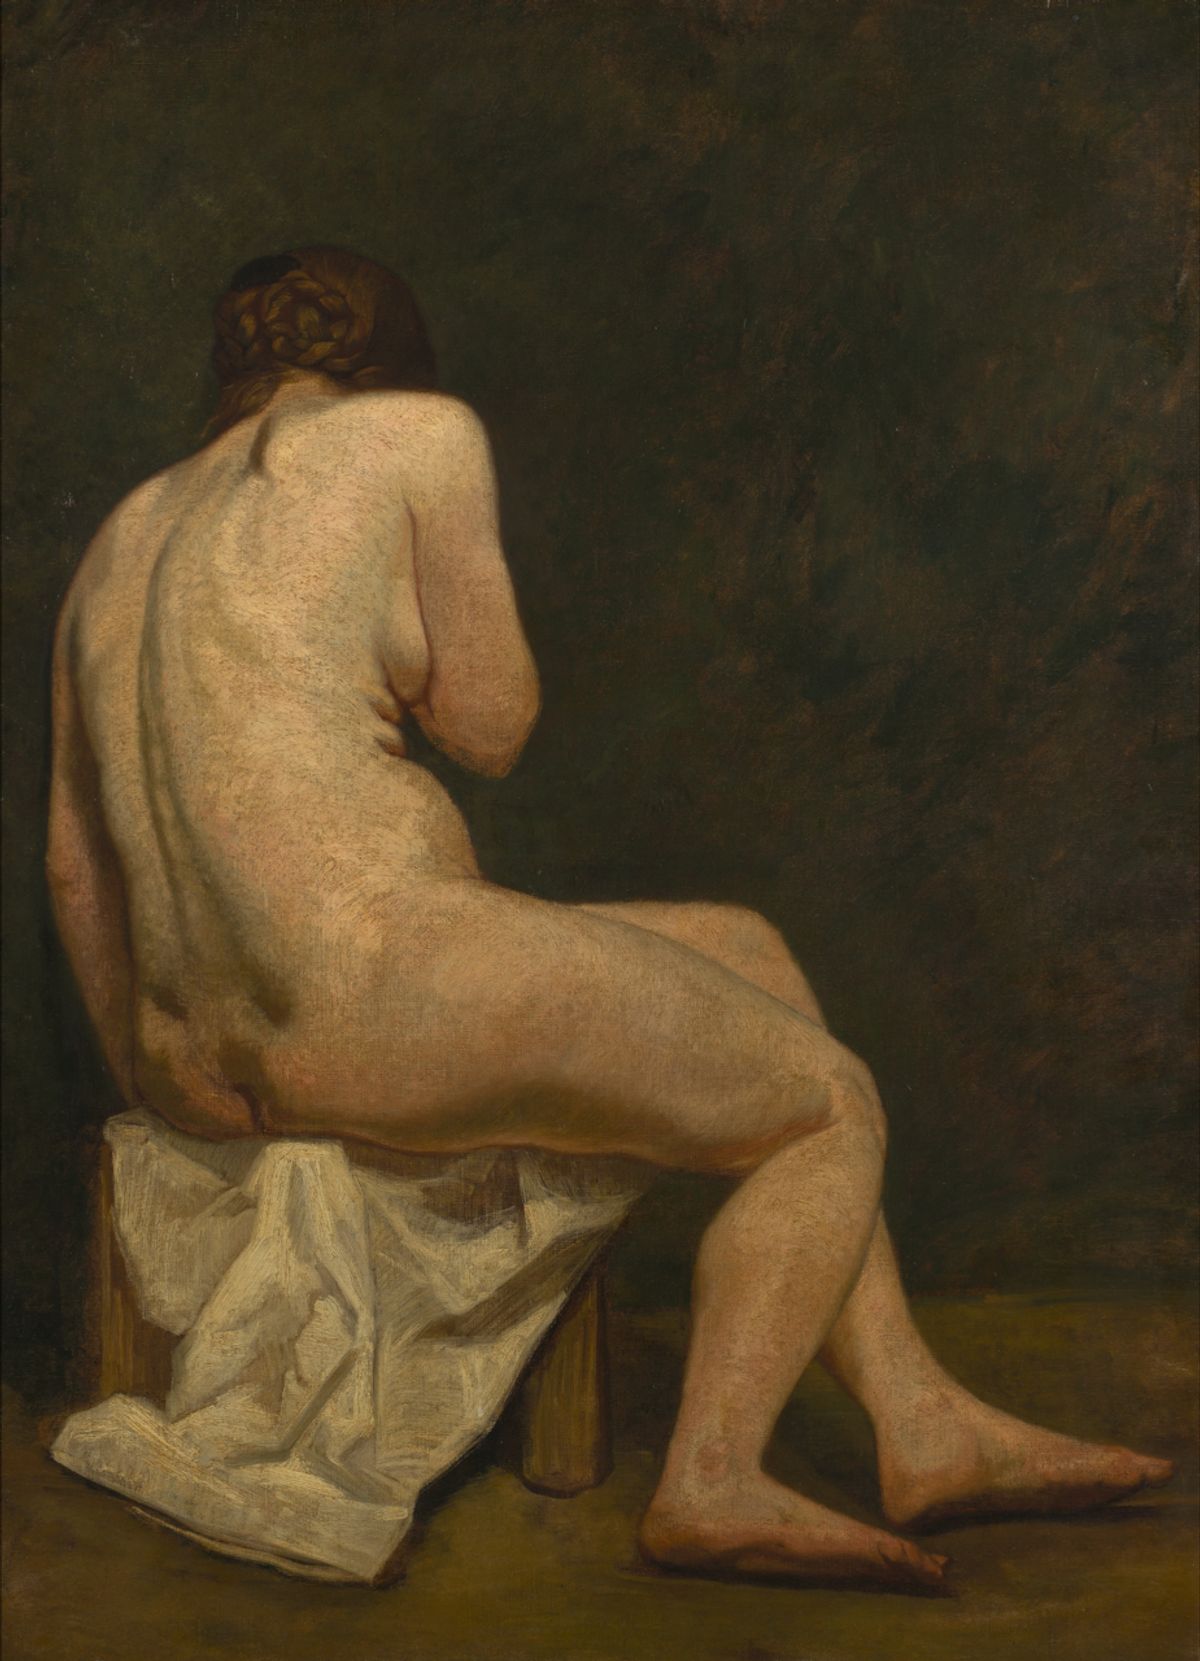 John Russell, Female Nude (about 1886), oil on canvas, 120cm by 92cm, Van Gogh Museum, Amsterdam (Vincent van Gogh Foundation) Courtesy of the Van Gogh Museum, Amsterdam (Vincent van Gogh Foundation)